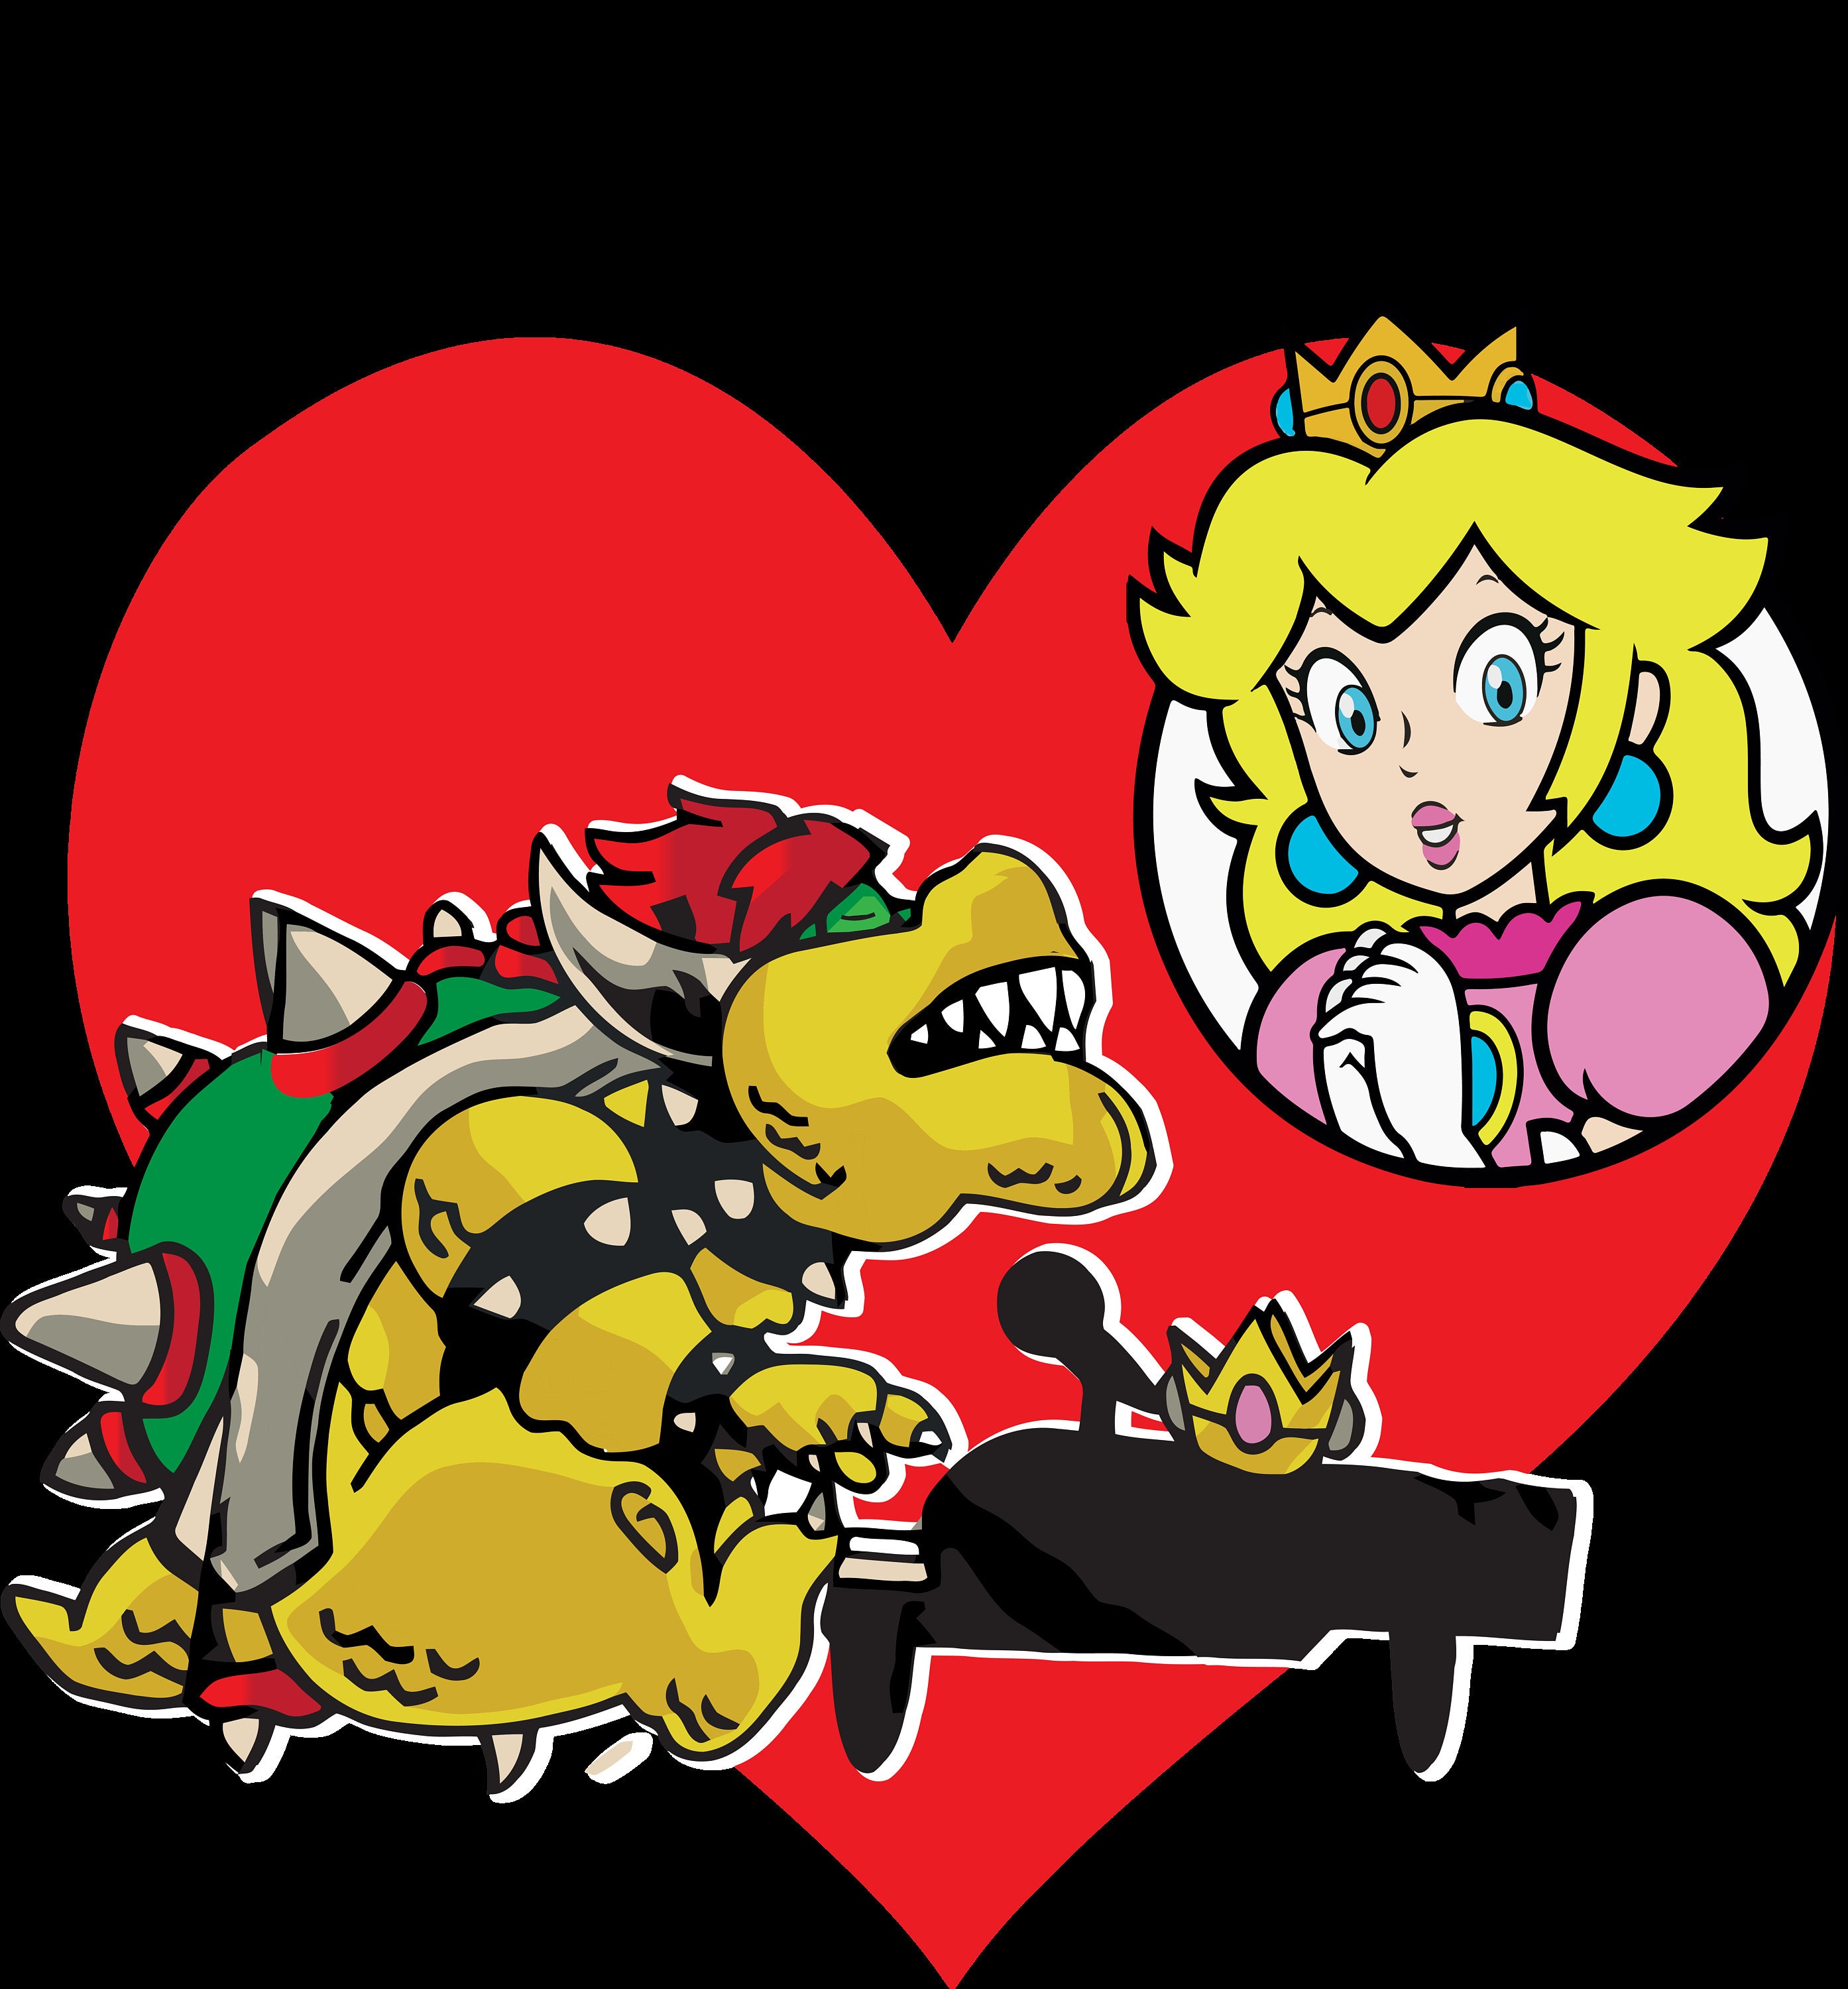 Is Peach or Bowser the monster? I think peach is. TAGGS: #fyp #bowser , peach rejects bowser